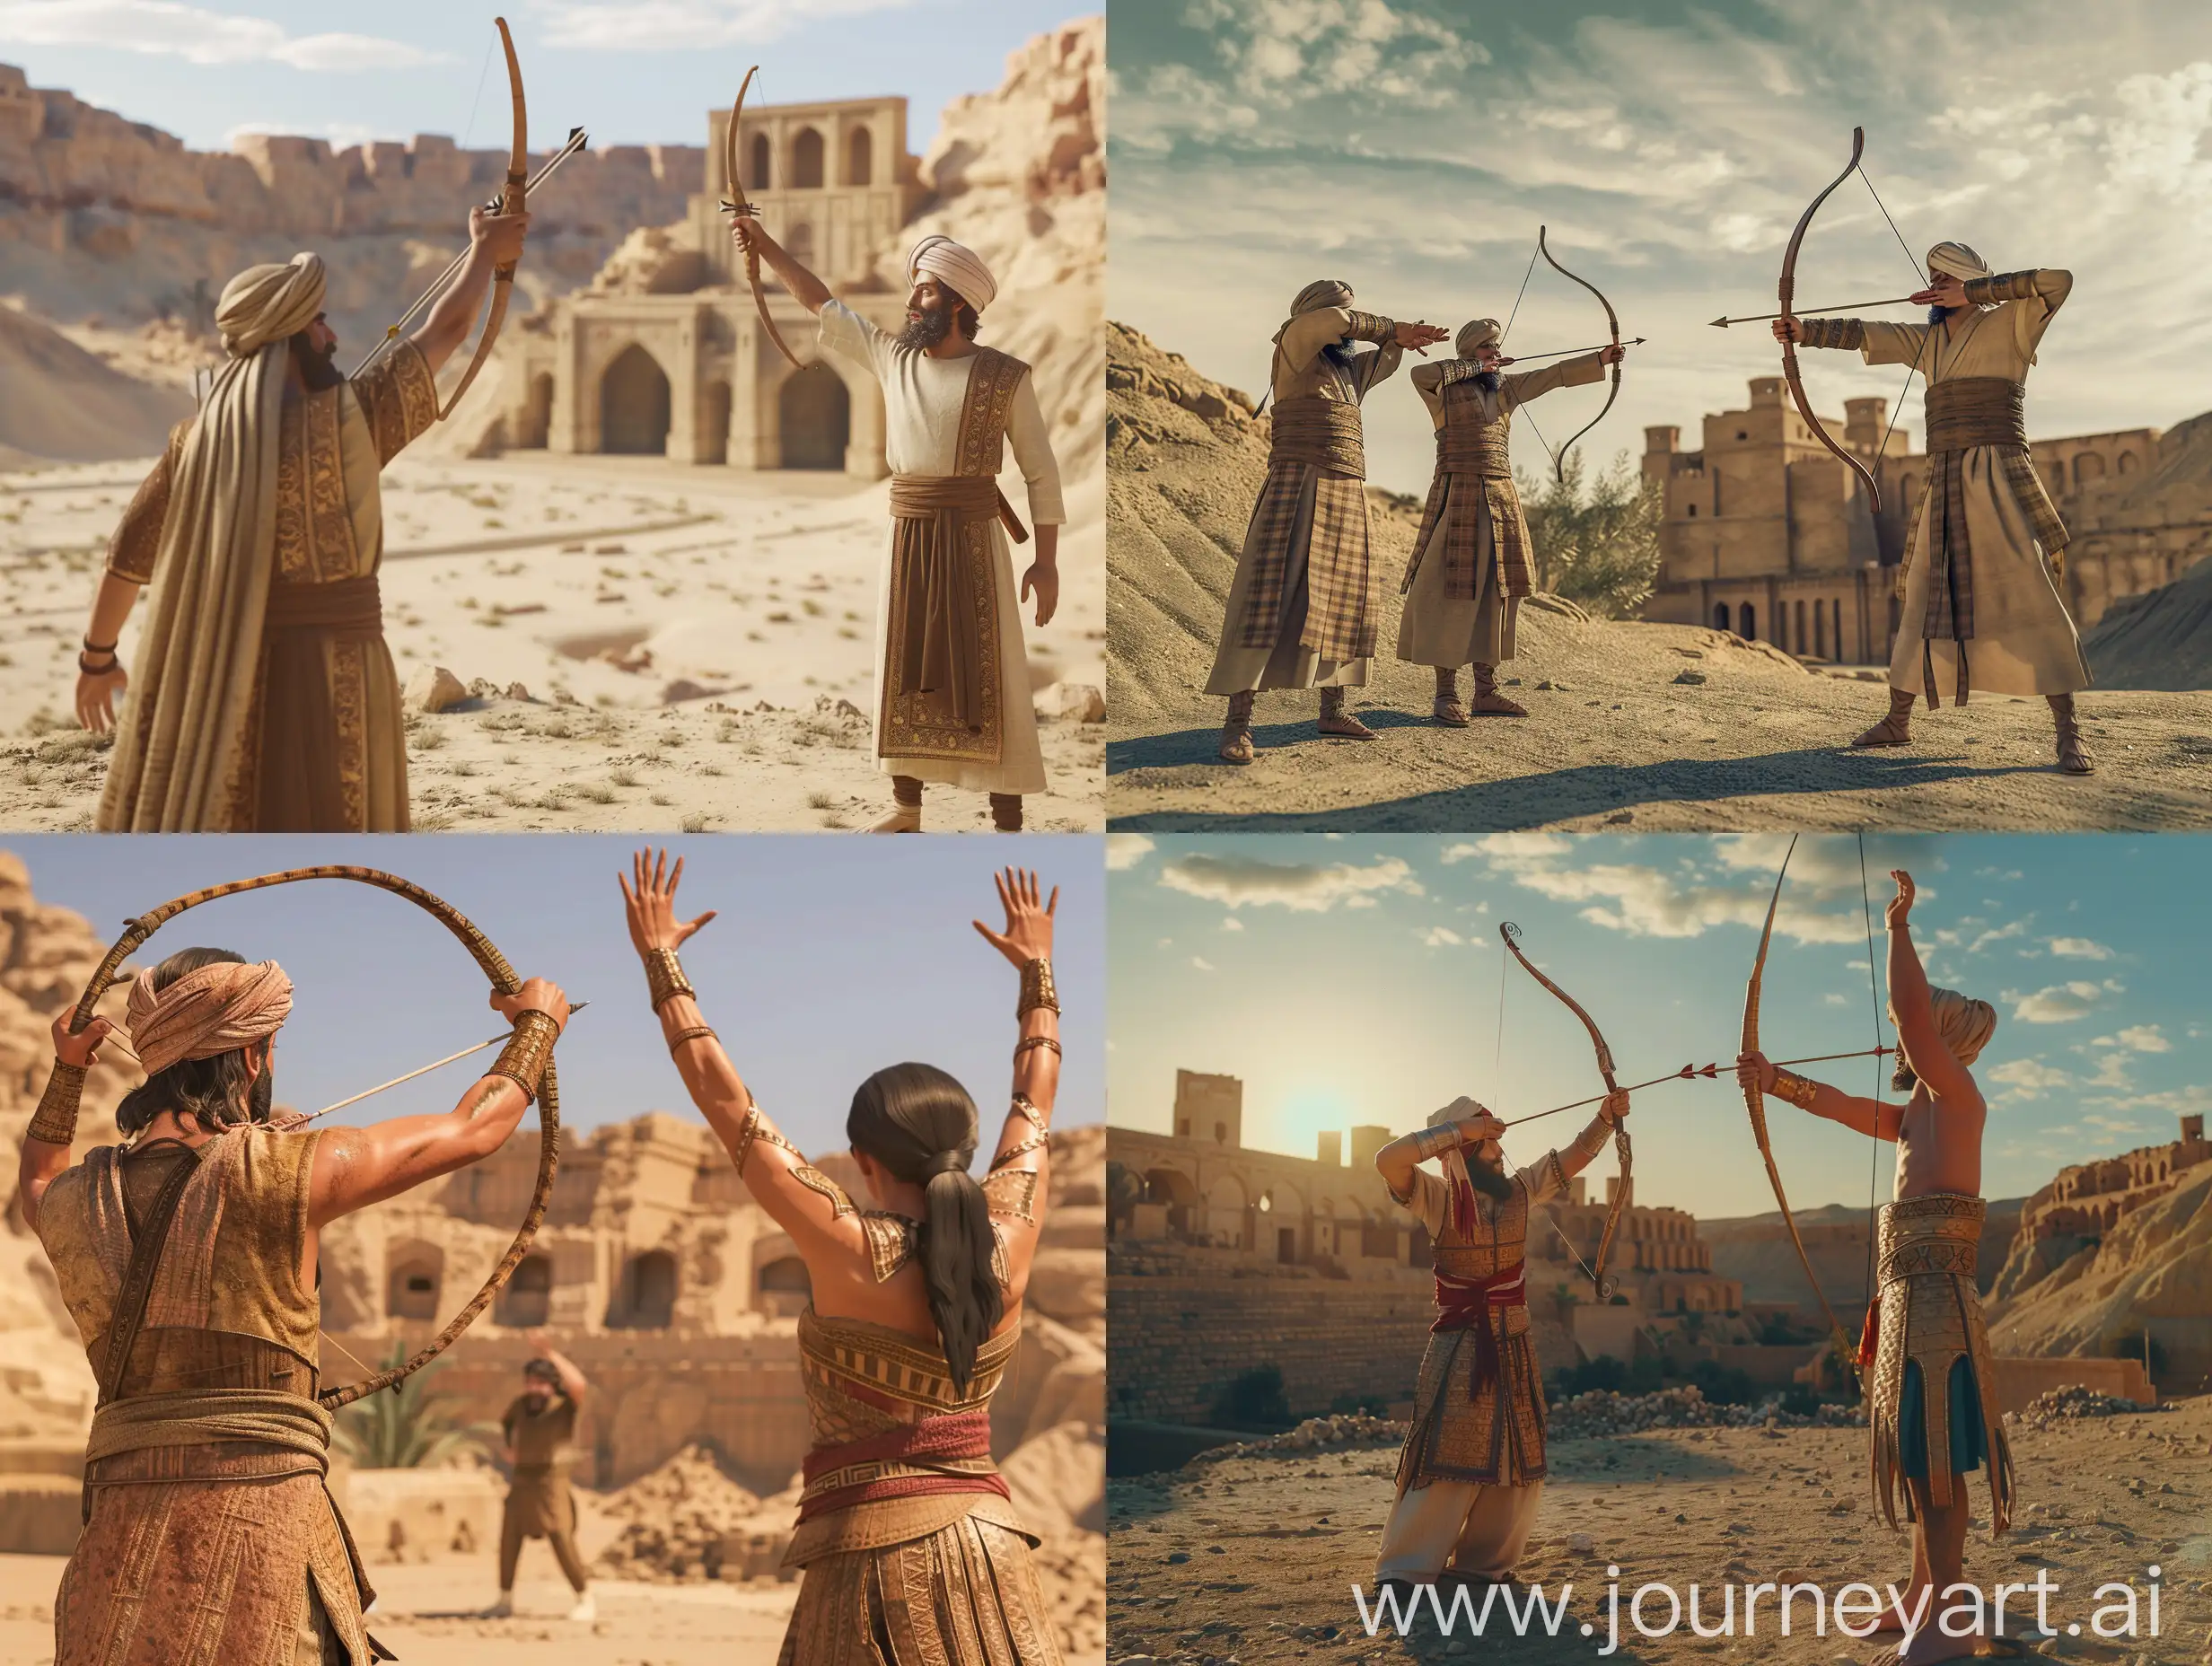 A couple of Persian archer soldiers in traditional dress in ancient Iran with fear below Arg Bam citadel raise their hands as a sign of surrender, because a Persian soldier in traditional dress is aiming at them with a bow and arrow, they are in the Persian Empire  .
make a real photo with accurate details and  High quality, create for me with midday lighting
a real picture with fine details and high quality, with noon lighting for me, create a realistic 4K photo with fine details and daylight lighting. Monitors, create for me a real quality photo with fine details and midday sun lighting, in a desert, in an ancient civilization, cinematic, epic realism,8K, highly detailed, medium shot, upper body, glamour lighting, natural lighting, backlit 